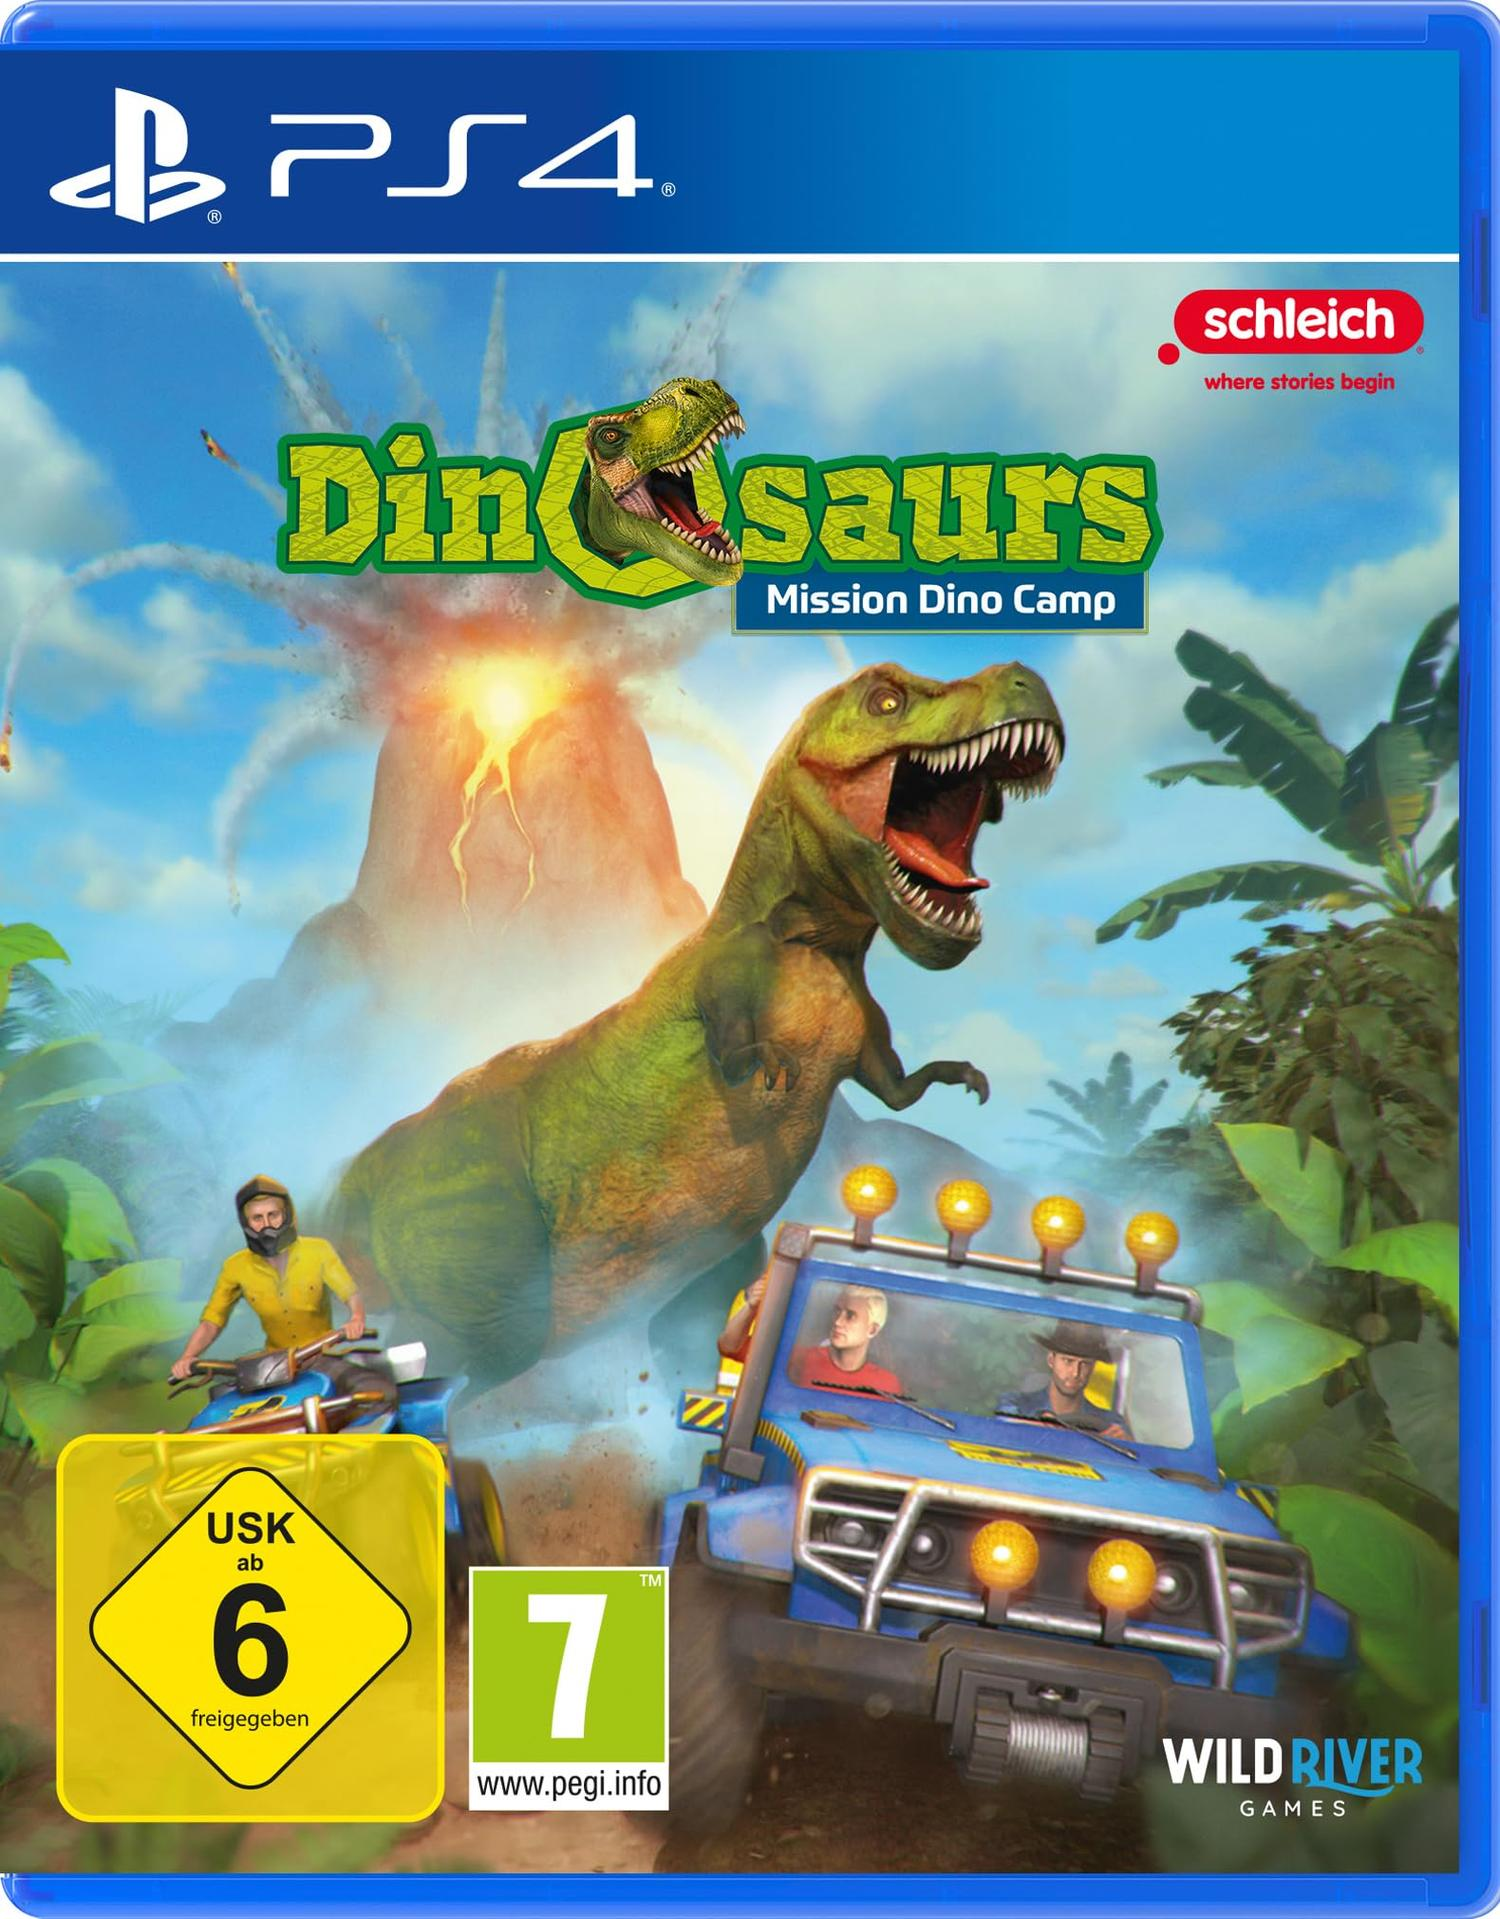 Mission [PlayStation Schleich Dino - PS4 4] Camp Dinosaurs